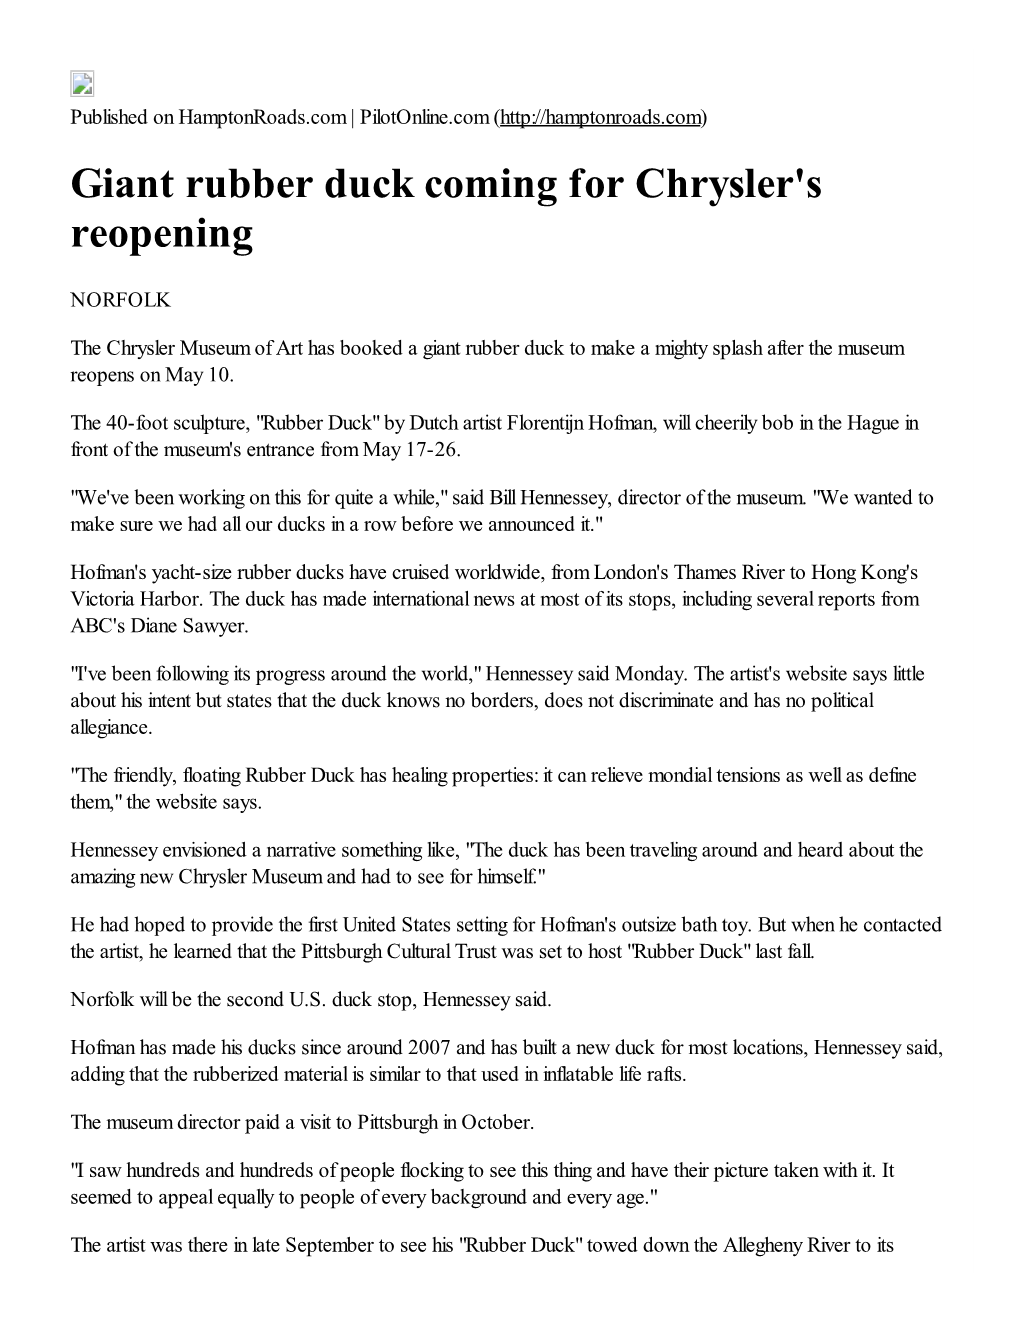 Giant Rubber Duck Coming for Chrysler's Reopening